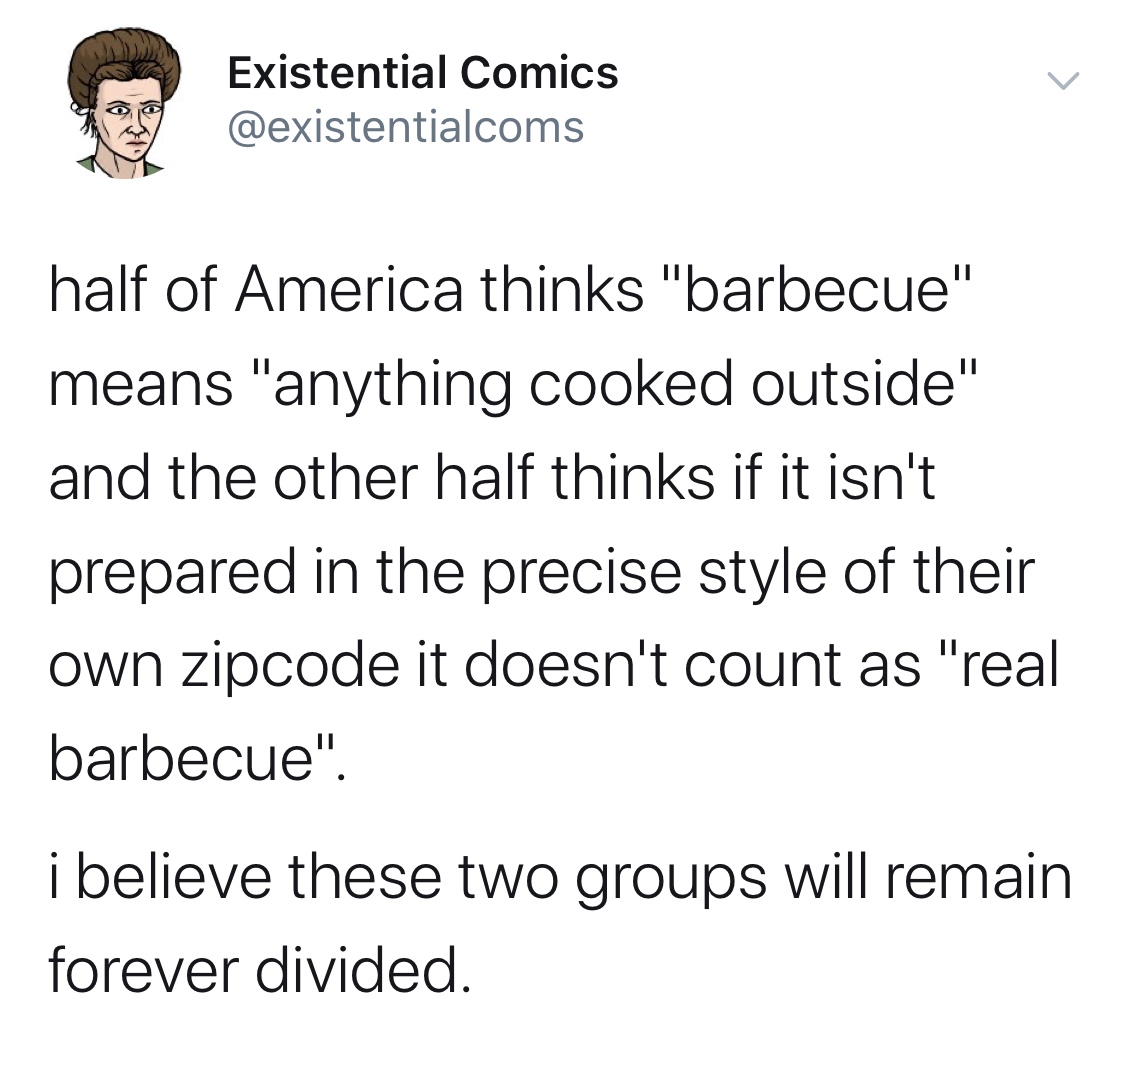 angle - Existential Comics half of America thinks "barbecue" means "anything cooked outside" and the other half thinks if it isn't prepared in the precise style of their own zipcode it doesn't count as "real barbecue". i believe these two groups will rema